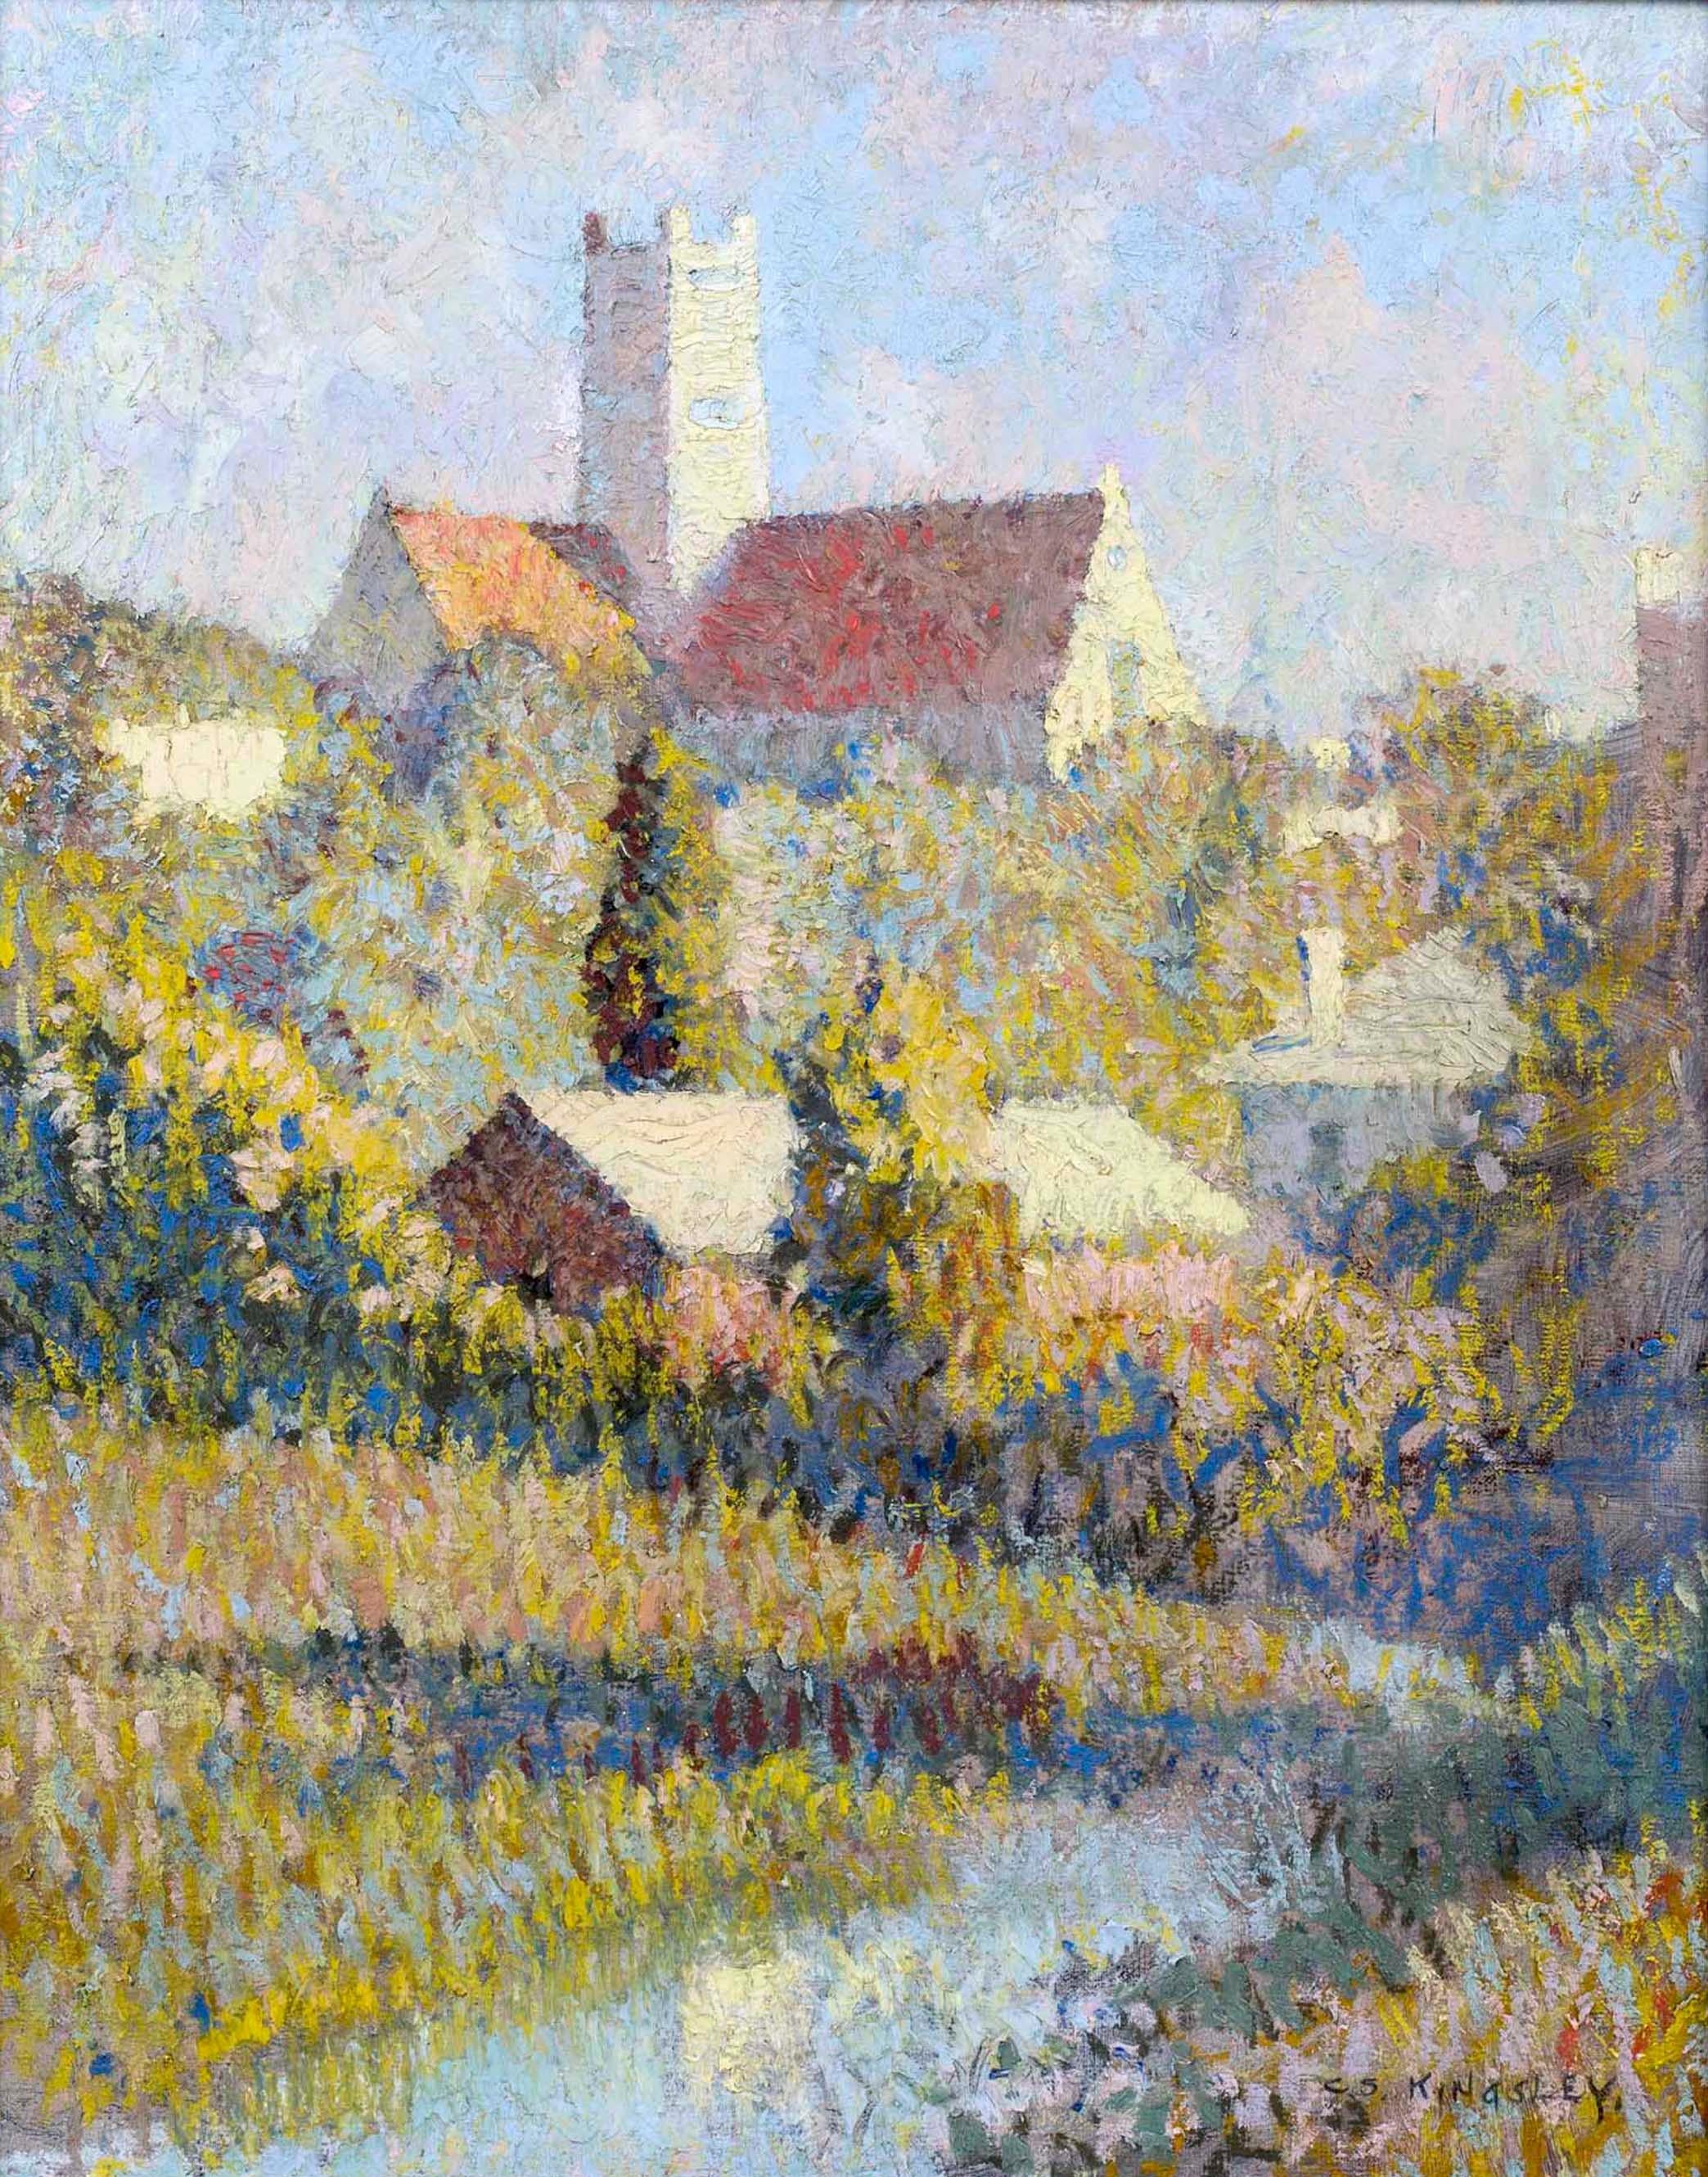 Chester S. Kingsley (Born 1878)
St. Anne's Church, Bermuda, c. 1913-14
Oil on canvas
20 x 16 inches
Signed lower right

Chester S. Kingsley was born on October 27th, 1878 in Flint, Michigan to Euretta and William P. Kingsley, a foreman in a planing